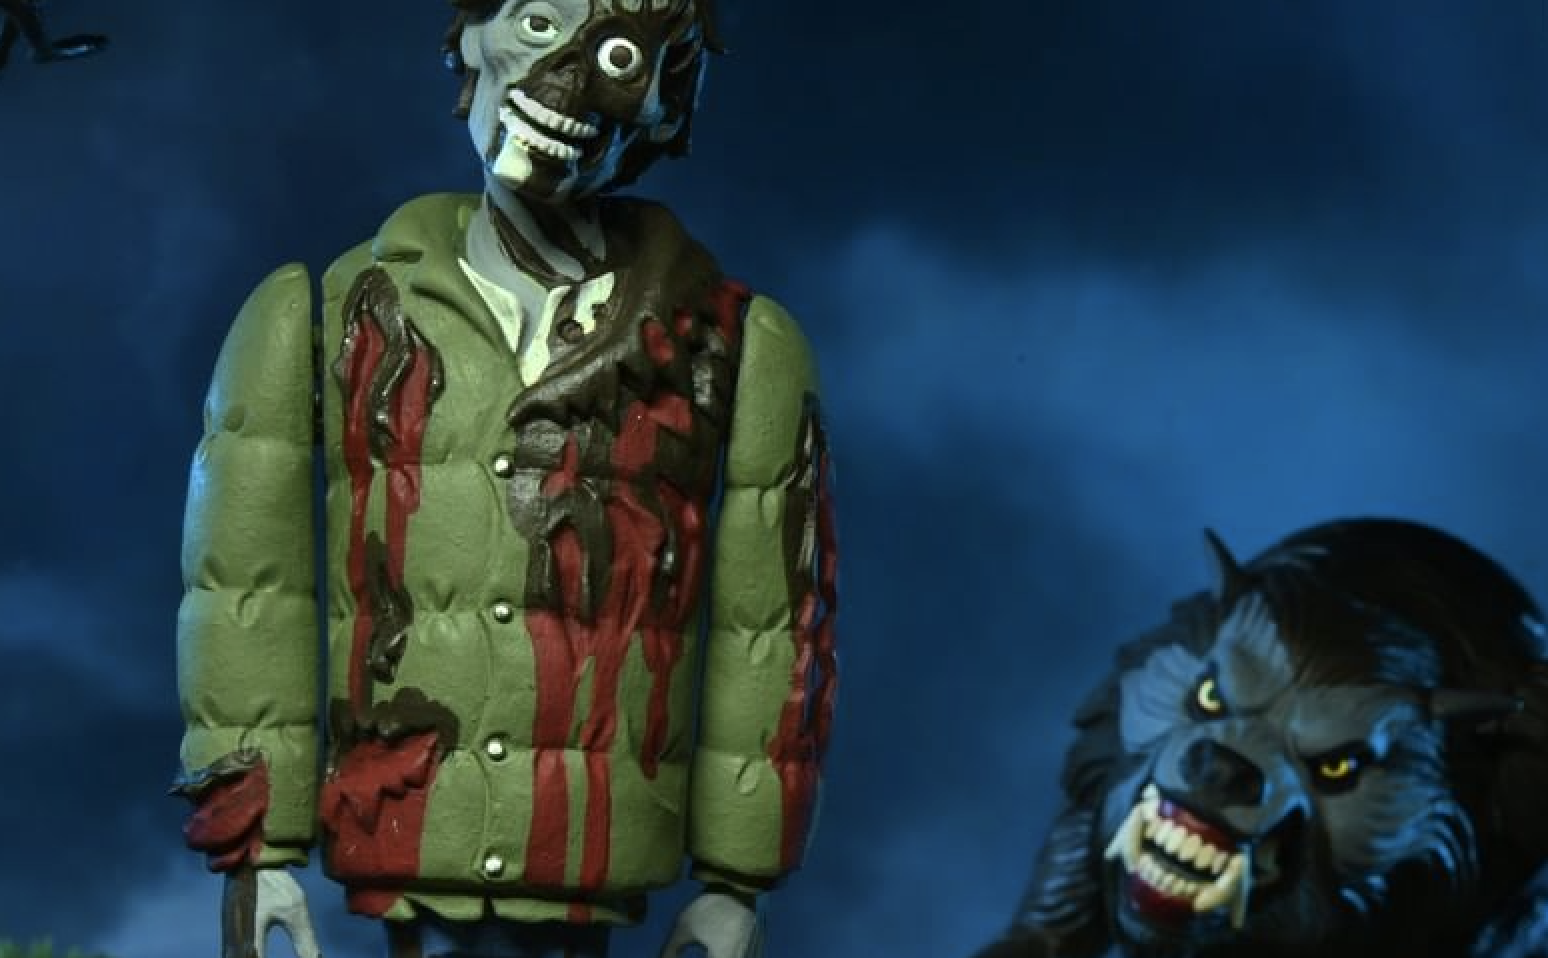 Early look at our Toony Terrors American Werewolf in London 2-pack